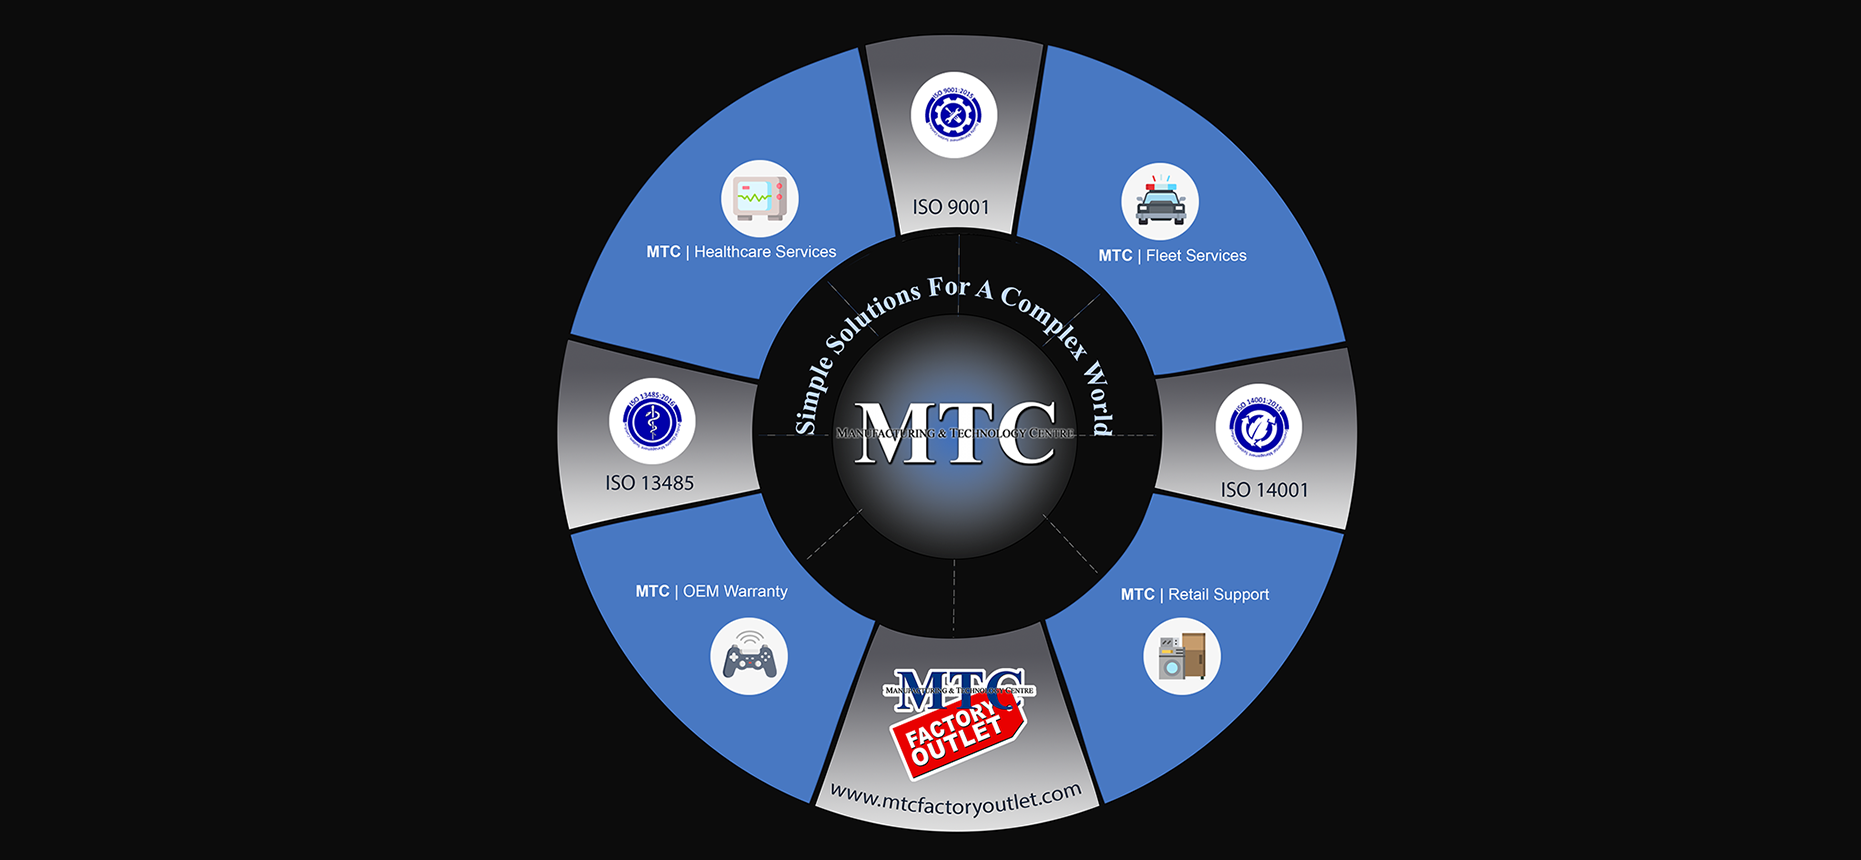 MTC - Manufacturing & Technology Centre